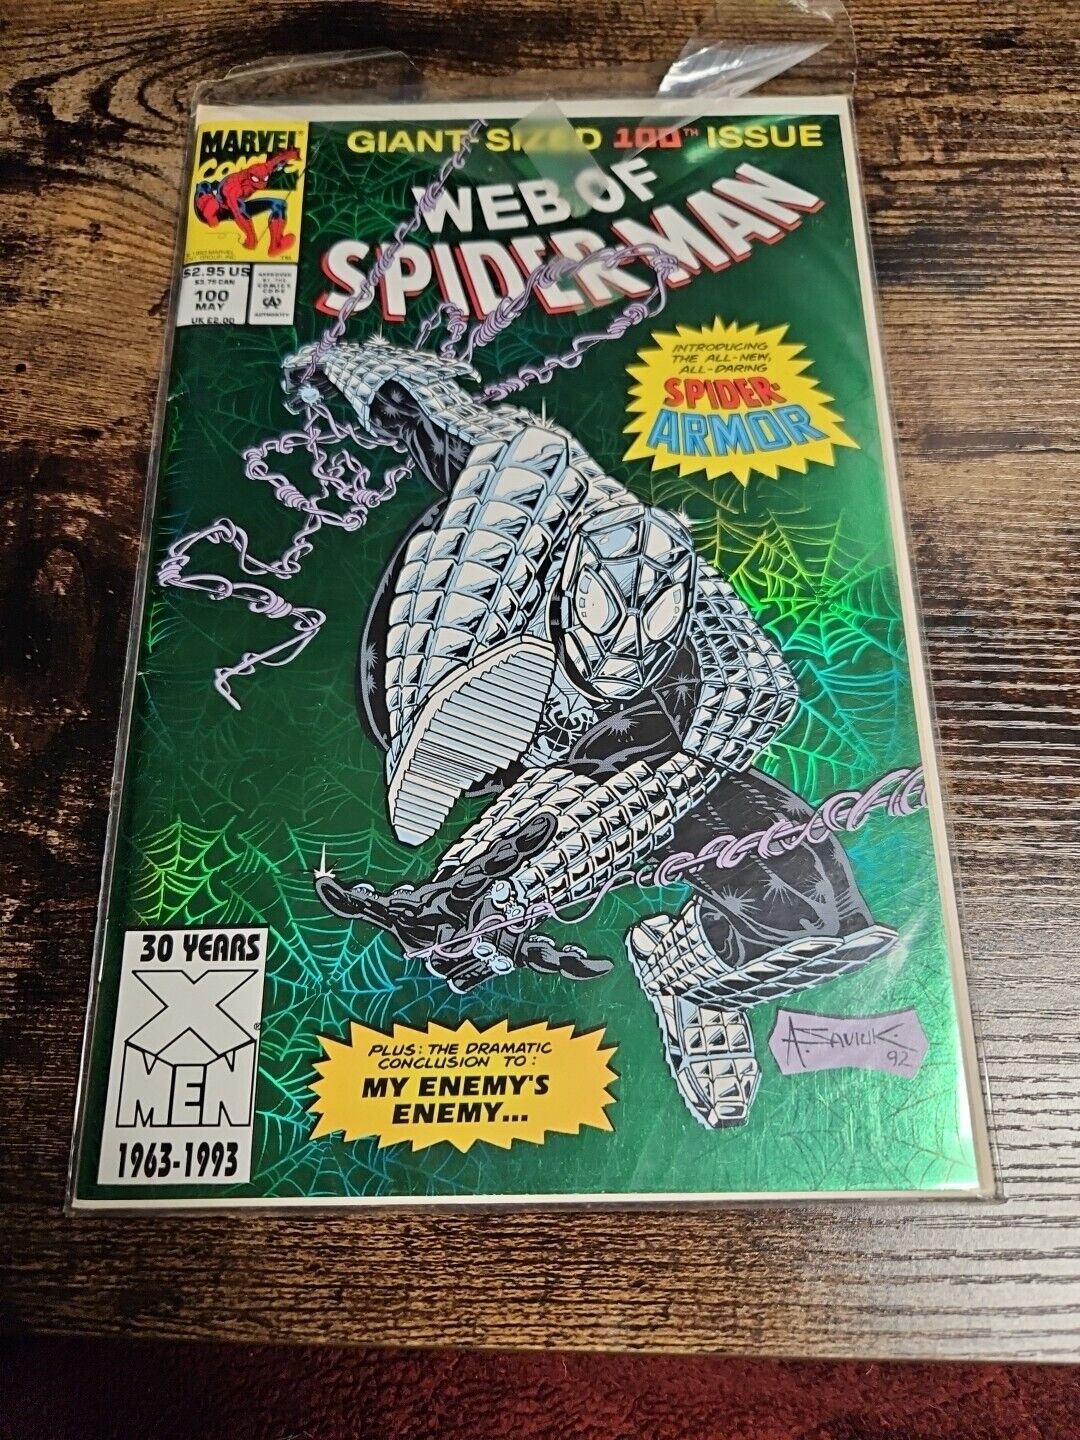 Web of Spider-man 1st Appearance of Spider Armor Foil Cover